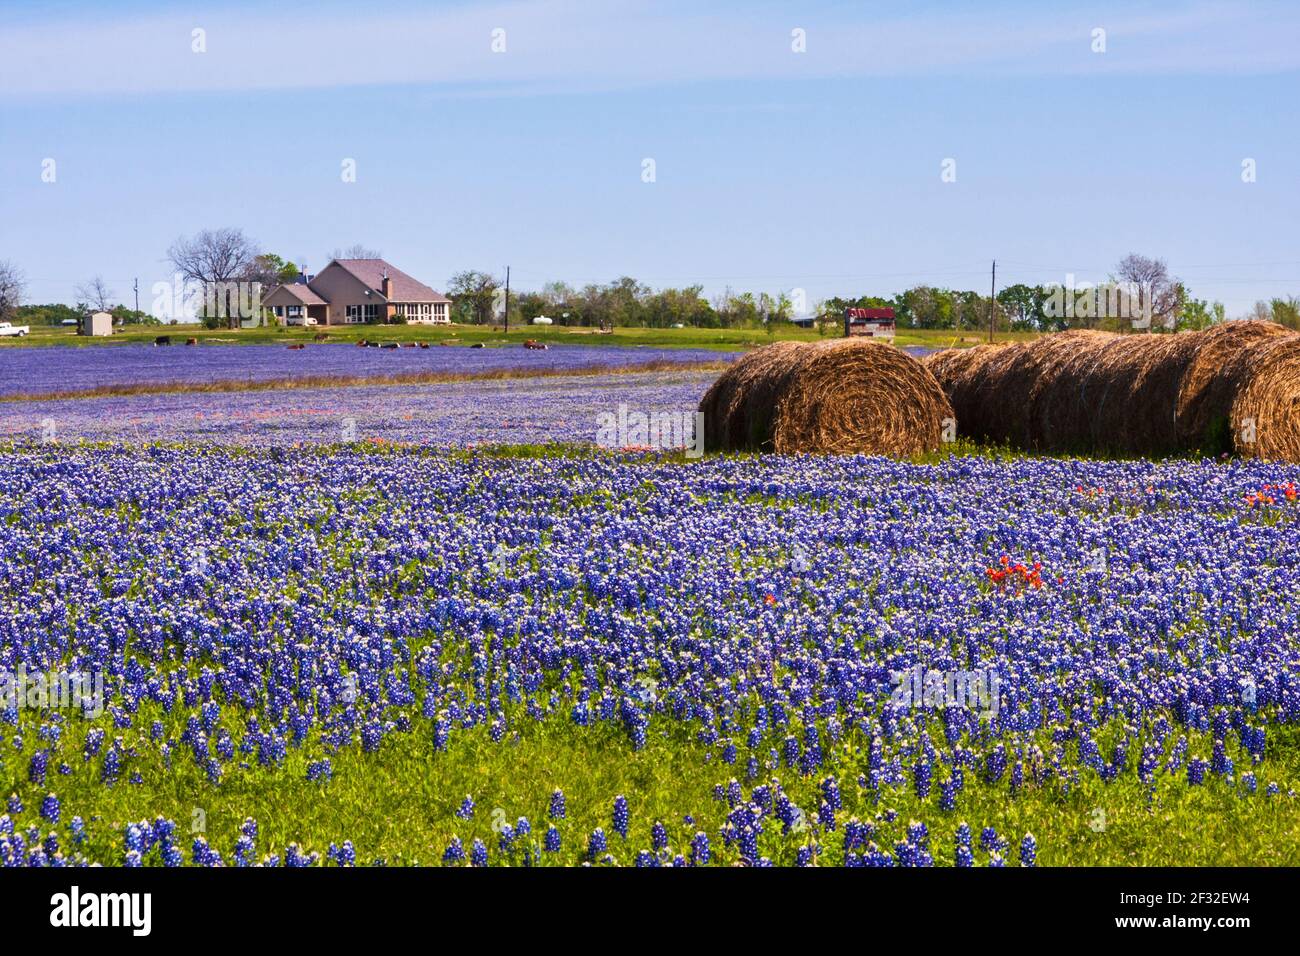 A field of Texas Bluebonnets, Lupinus texensis, with hay bales on a ranch along Texas highway 382 near Whitehall, Texas. Stock Photo